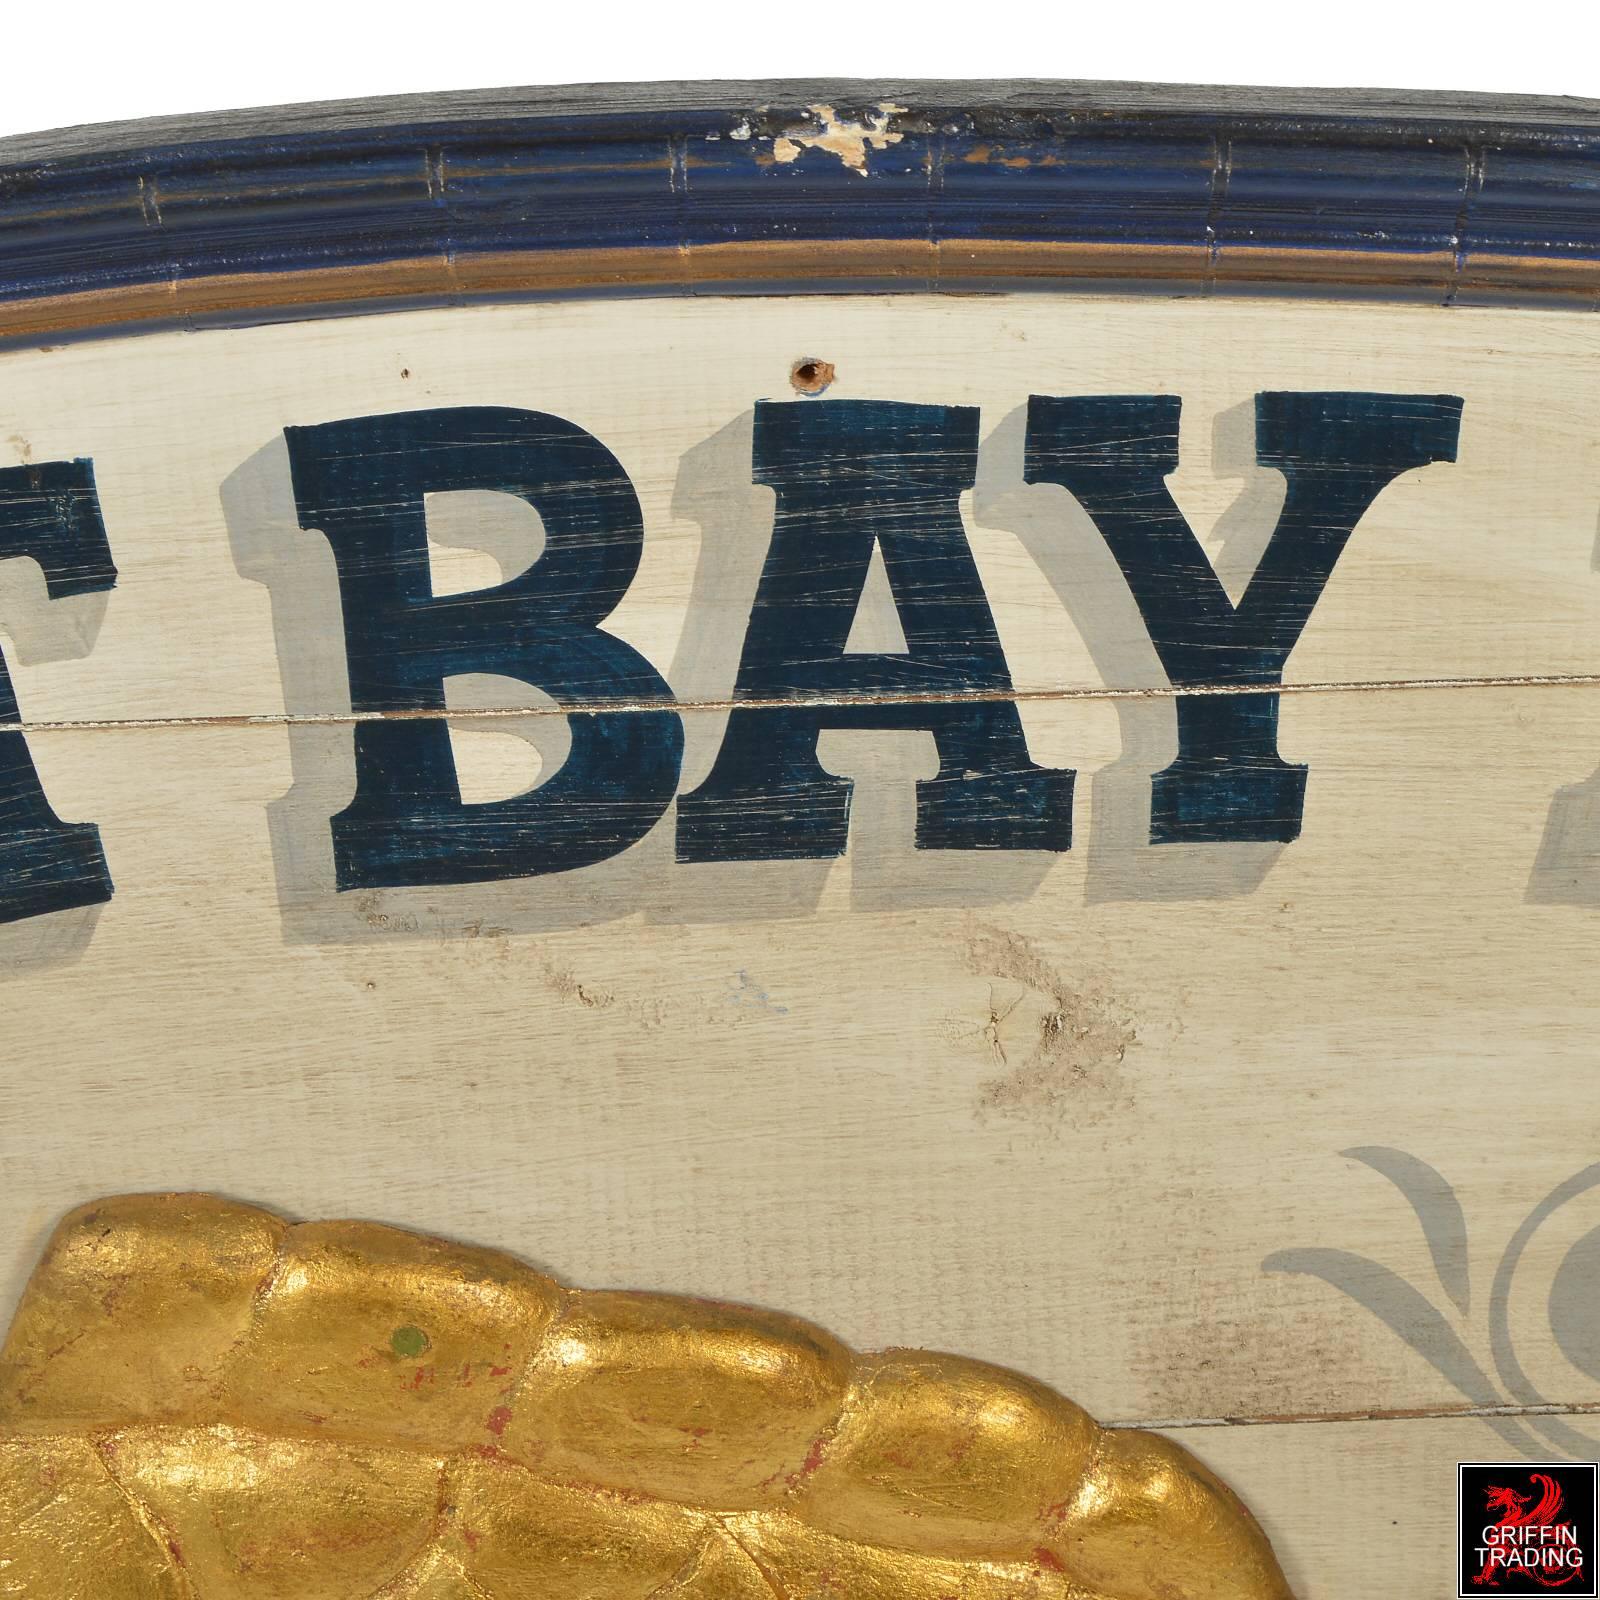 American East Bay Fish Packing Company Trade Sign For Sale